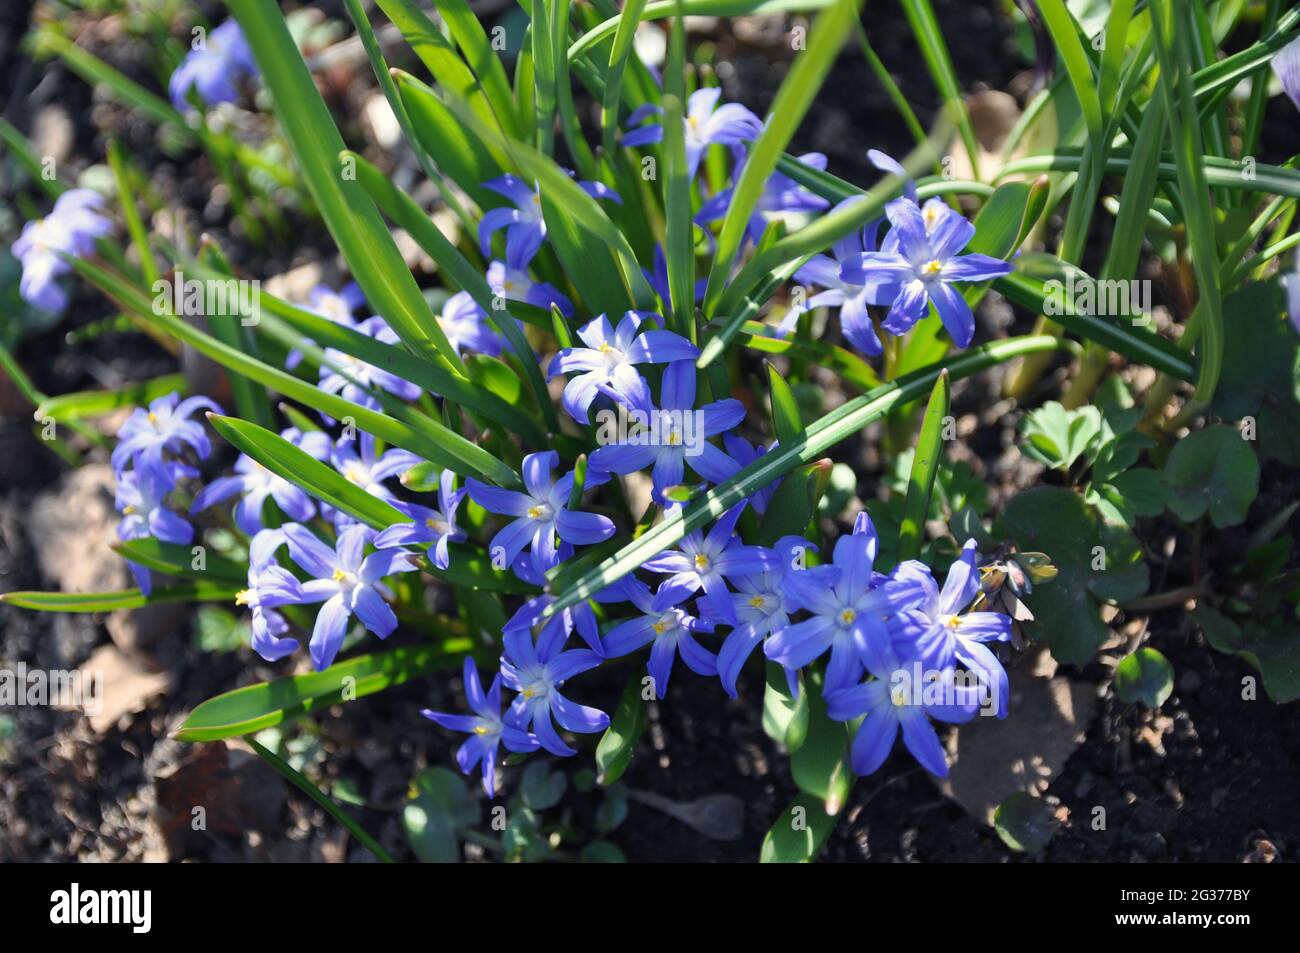 Spring primroses. Chionodoxa forbesii in the spring garden. Early flowering bulbous plants with beautiful blue flowers in a spring park. Stock Photo